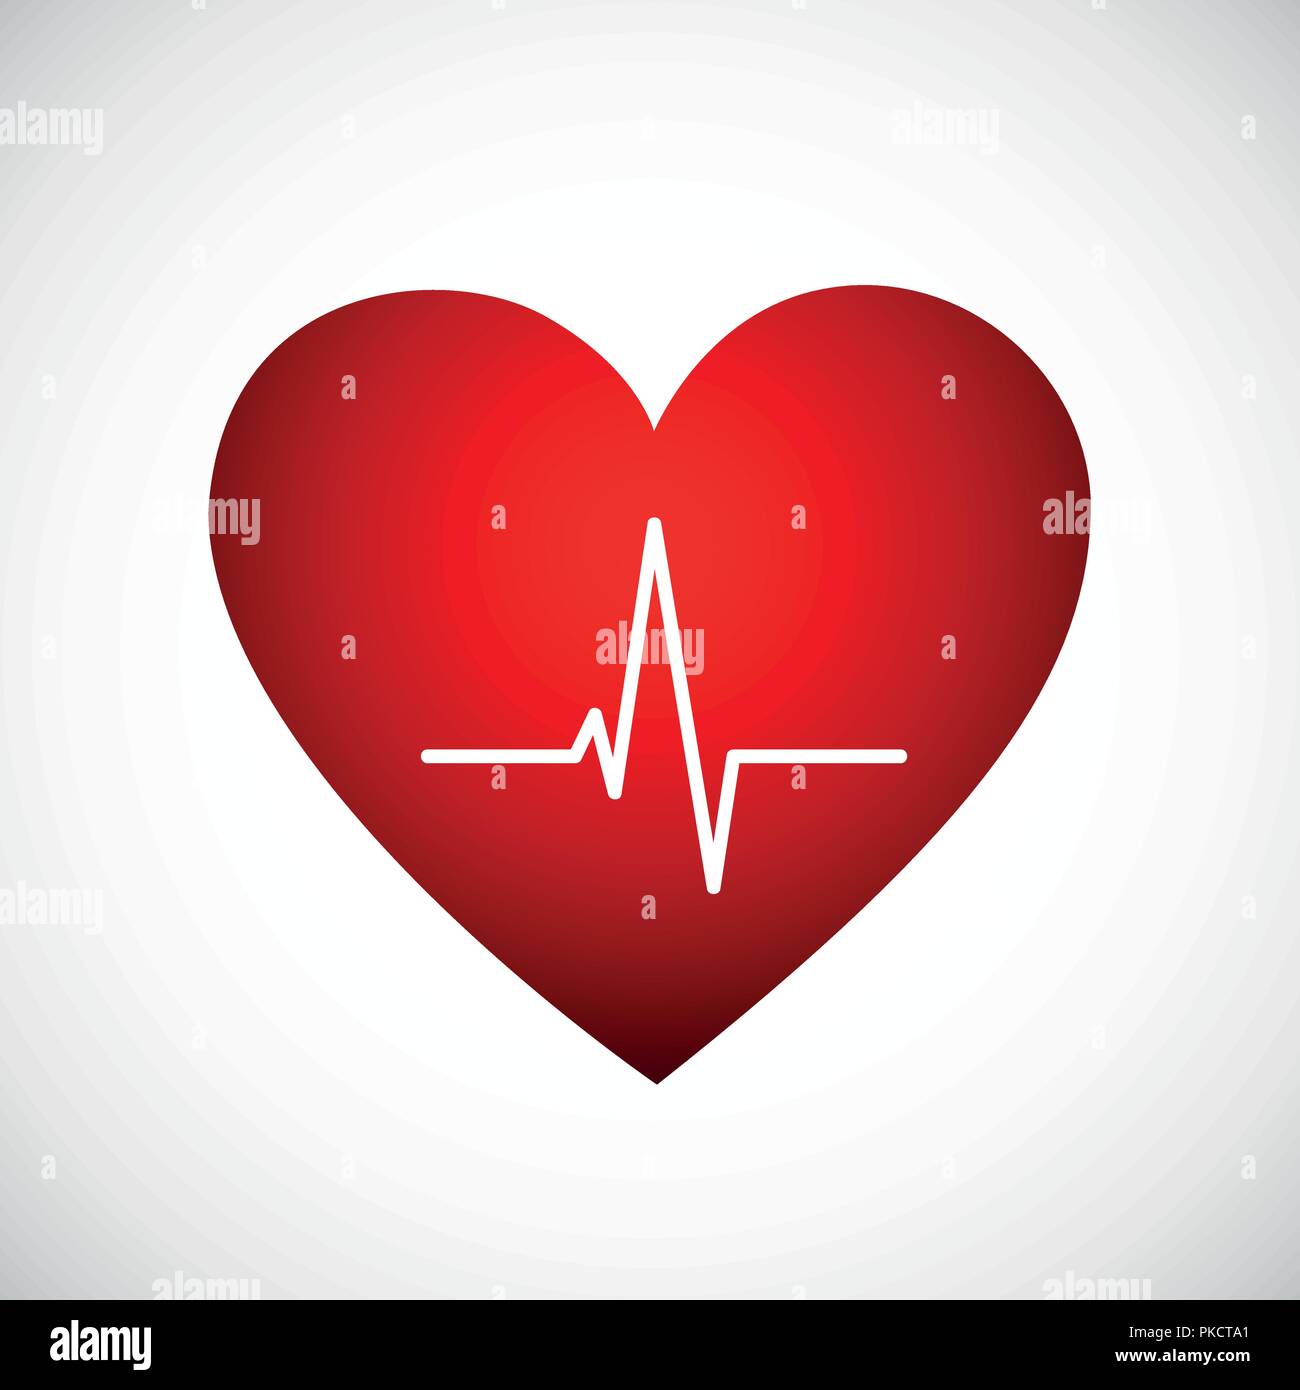 medicine heartbeat flat lines cardiogram inside a red heart icon vector illustration EPS10 Stock Vector